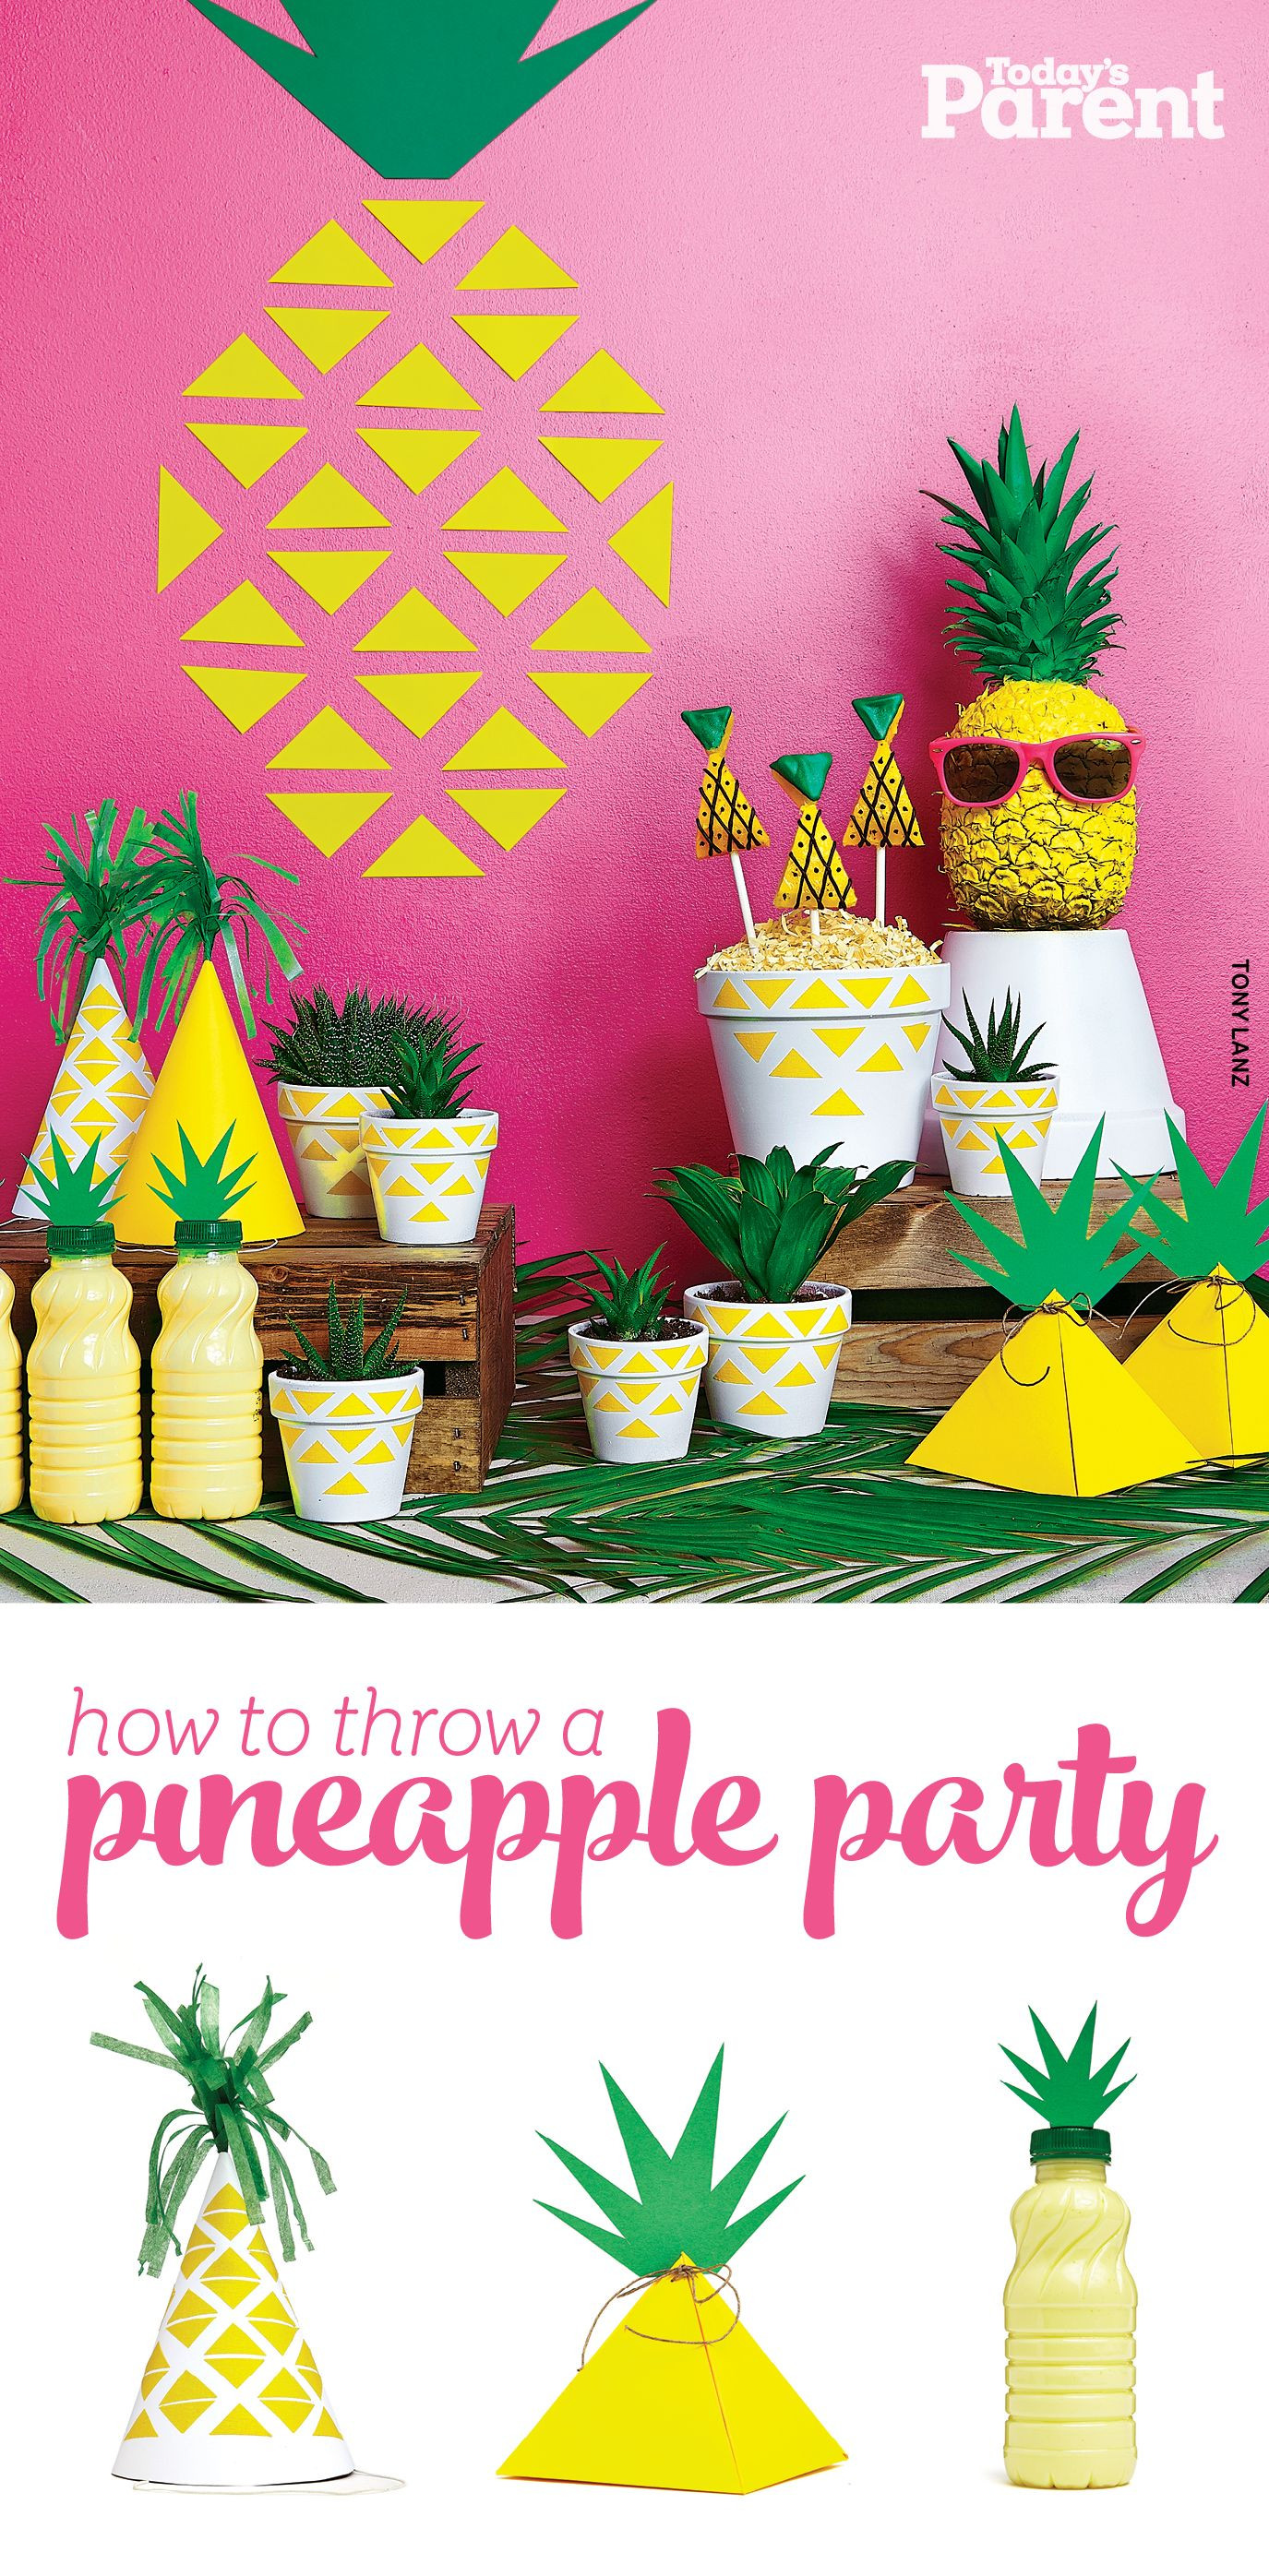 Summer Bday Party Ideas
 How to throw a pineapple party